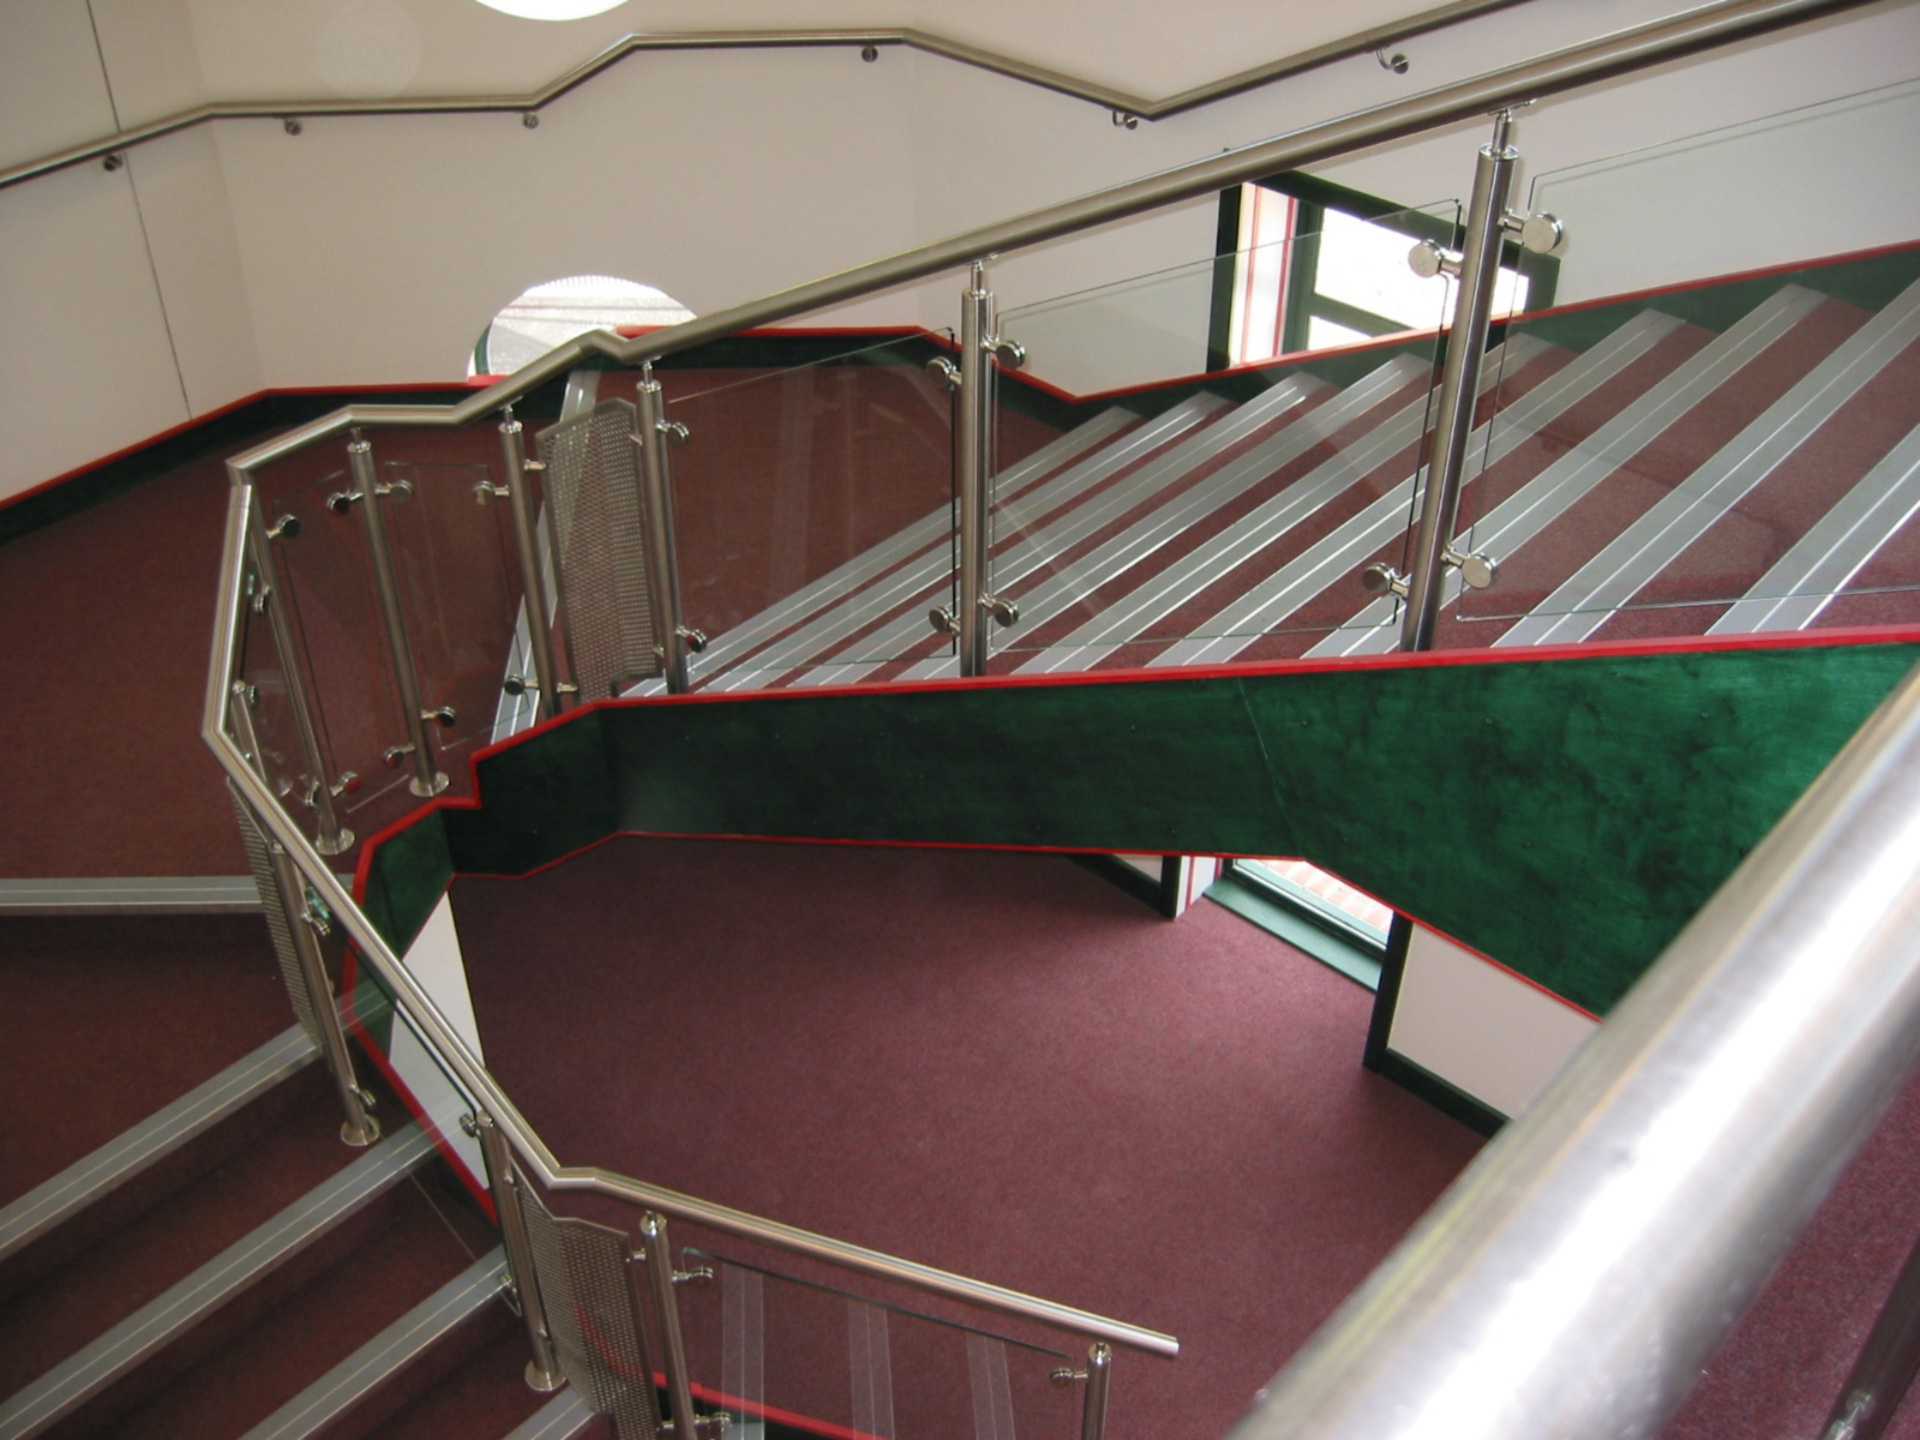 stainless steel handrail with glass infill panels